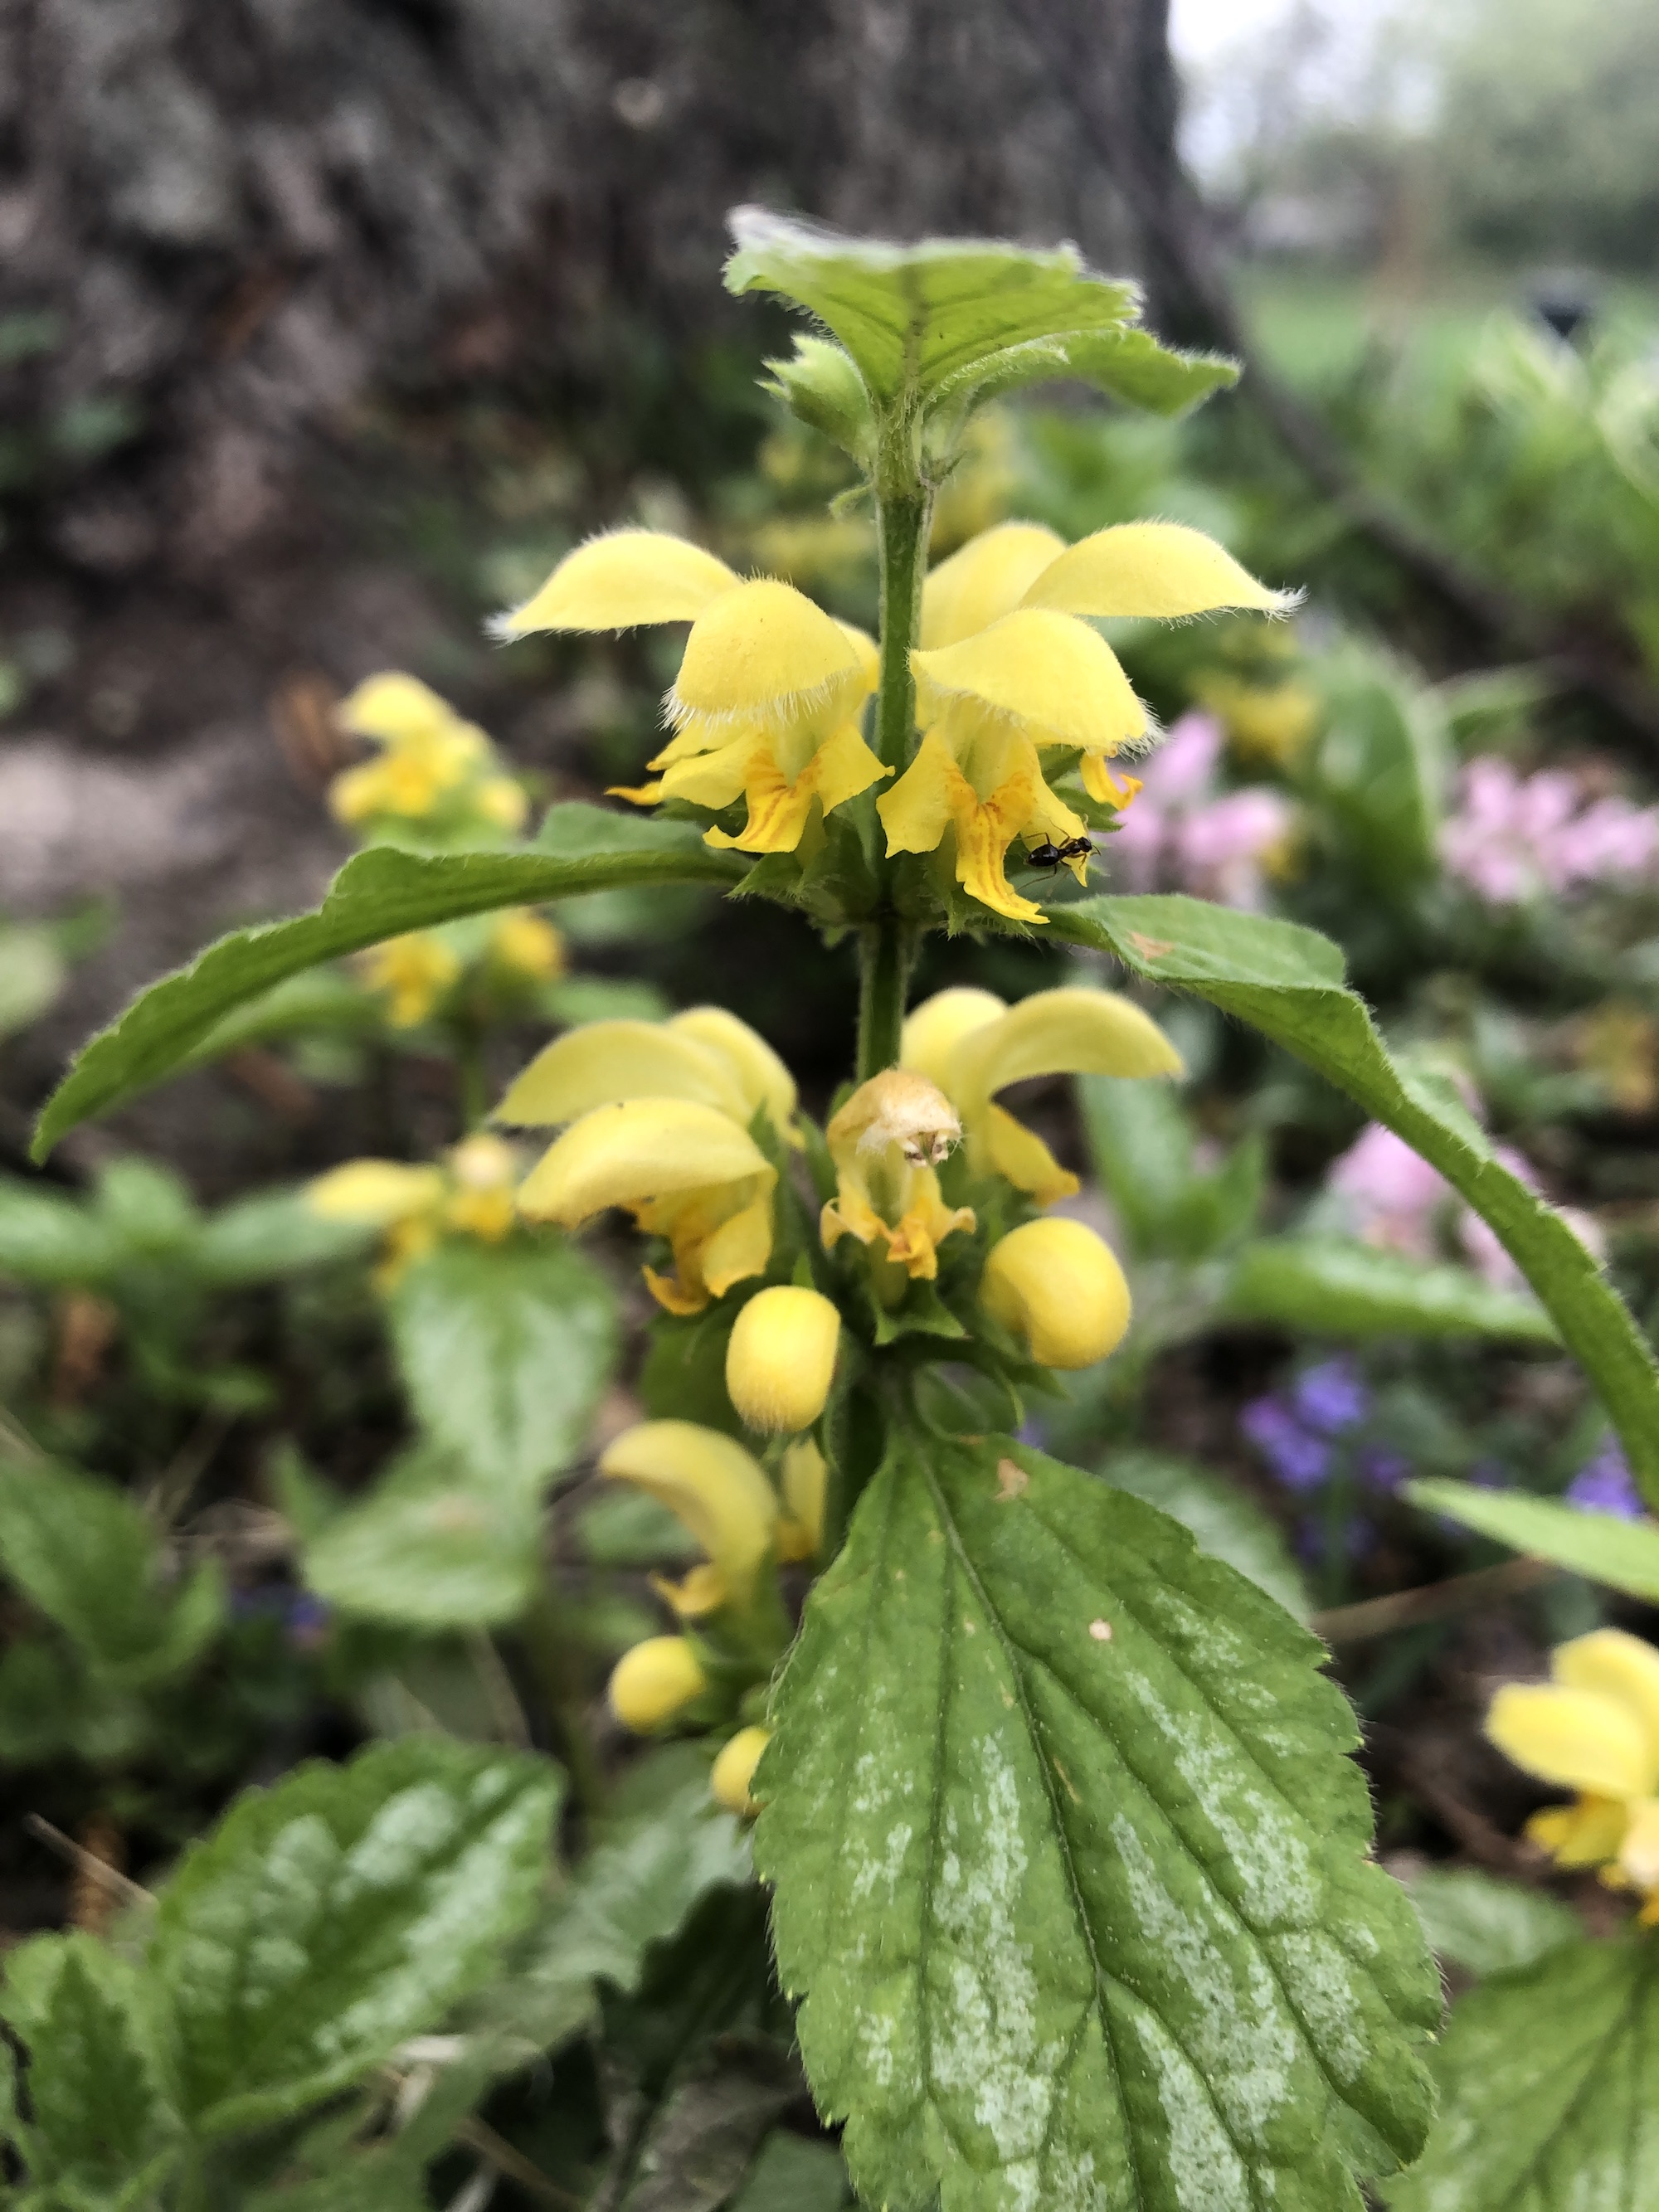 Yellow Archangel by Wingra Boathouse in Madison, Wisconsin on May 3, 2021.